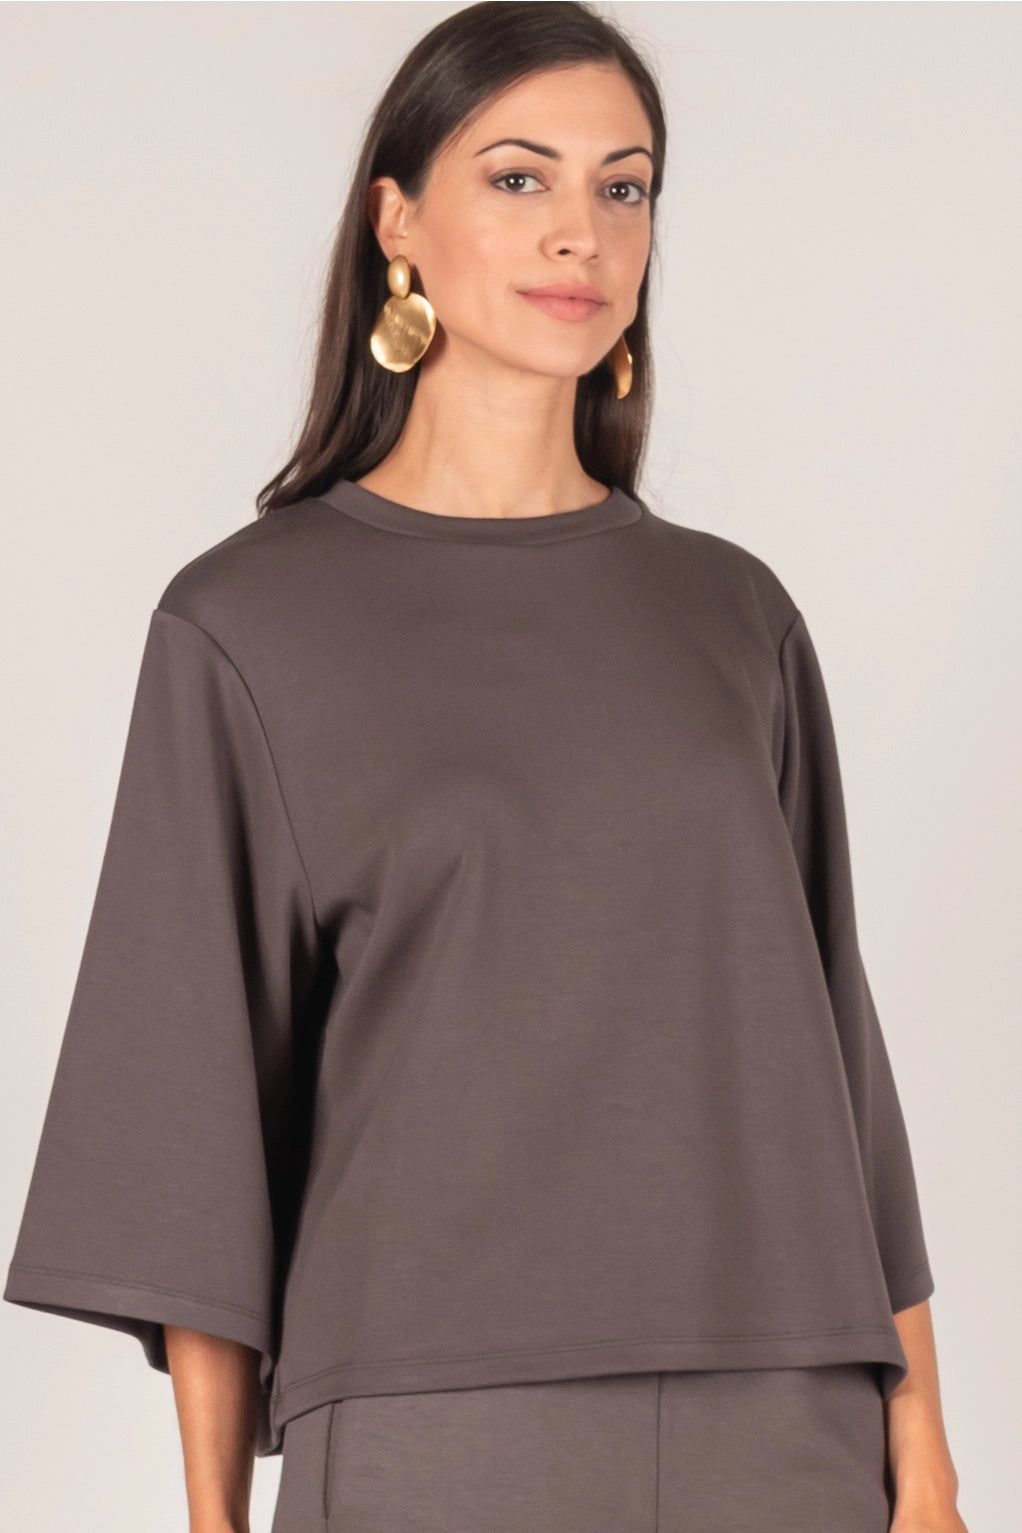 Butter Modal 3/4 Sleeve Top- Two Colors